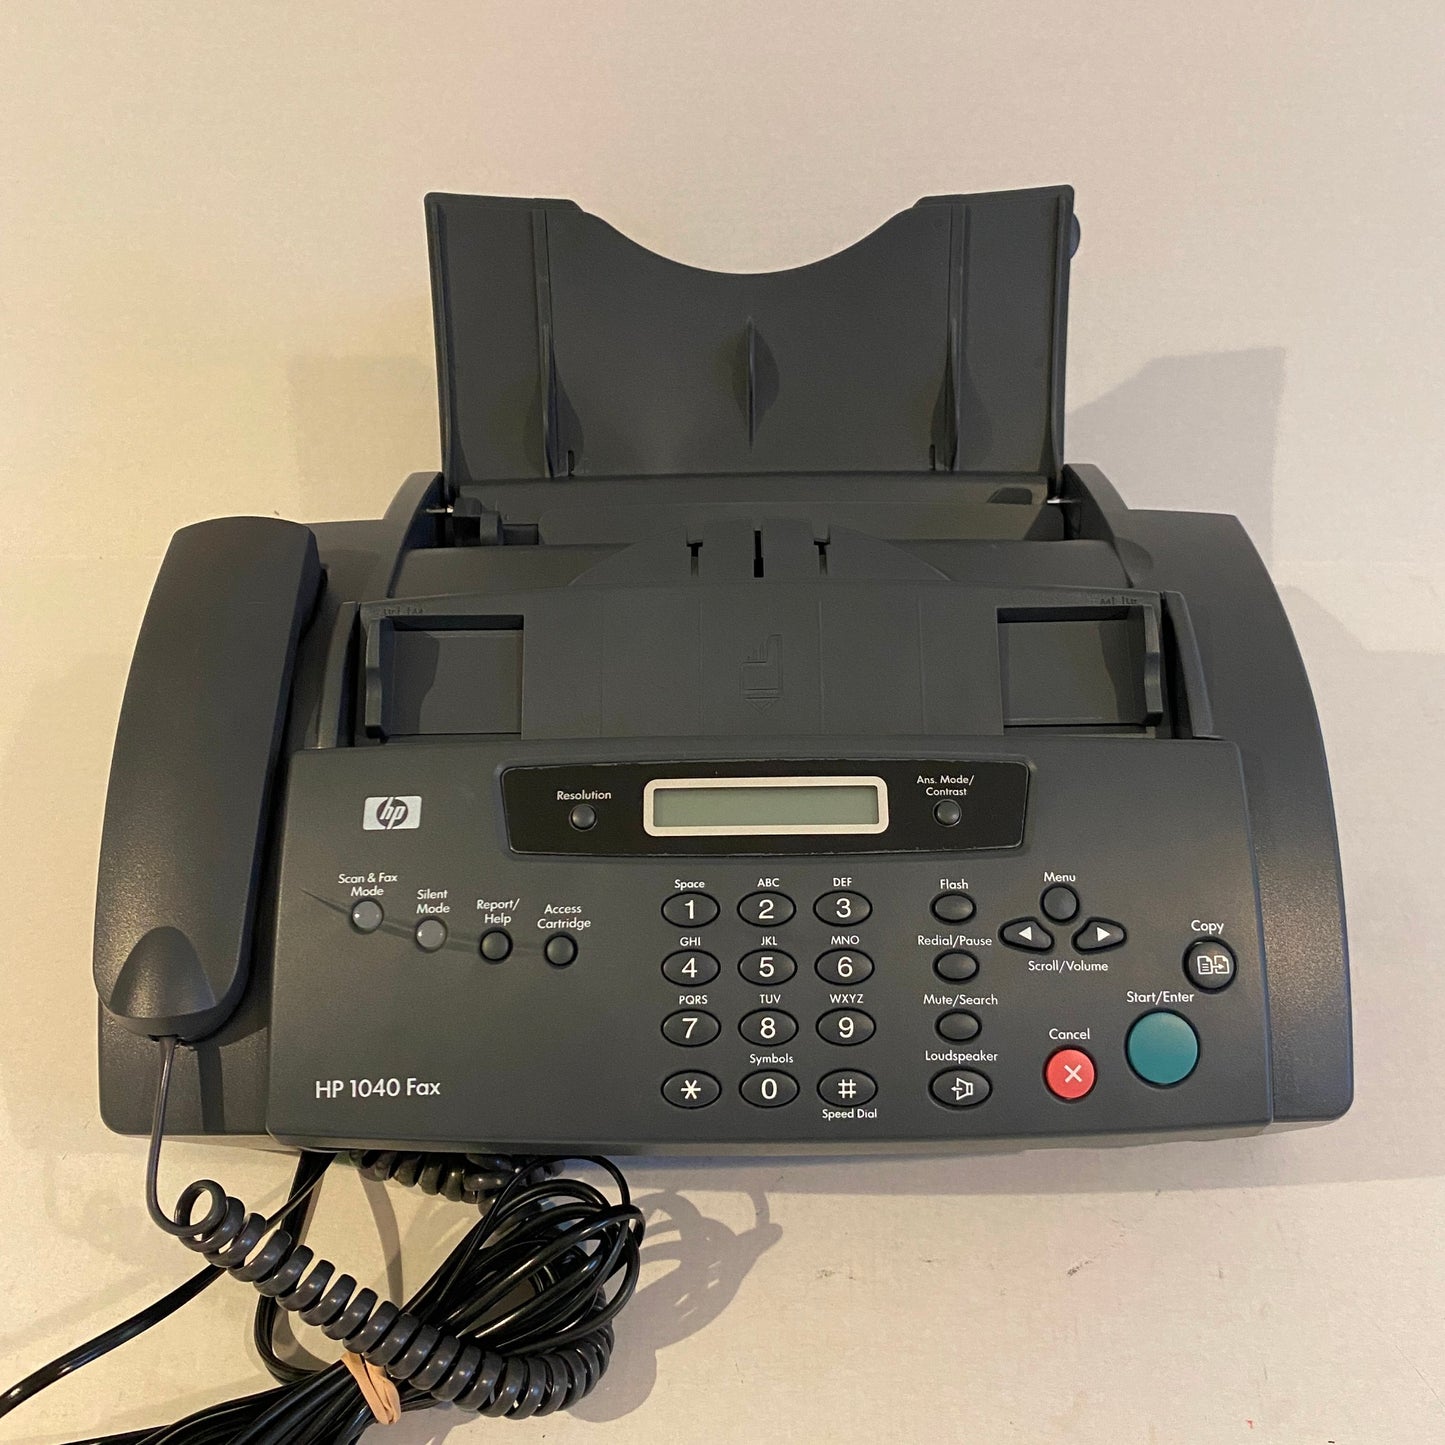 HP 1040 Inkjet Fax Machine with Built-in Telephone Handset - BW2123HH